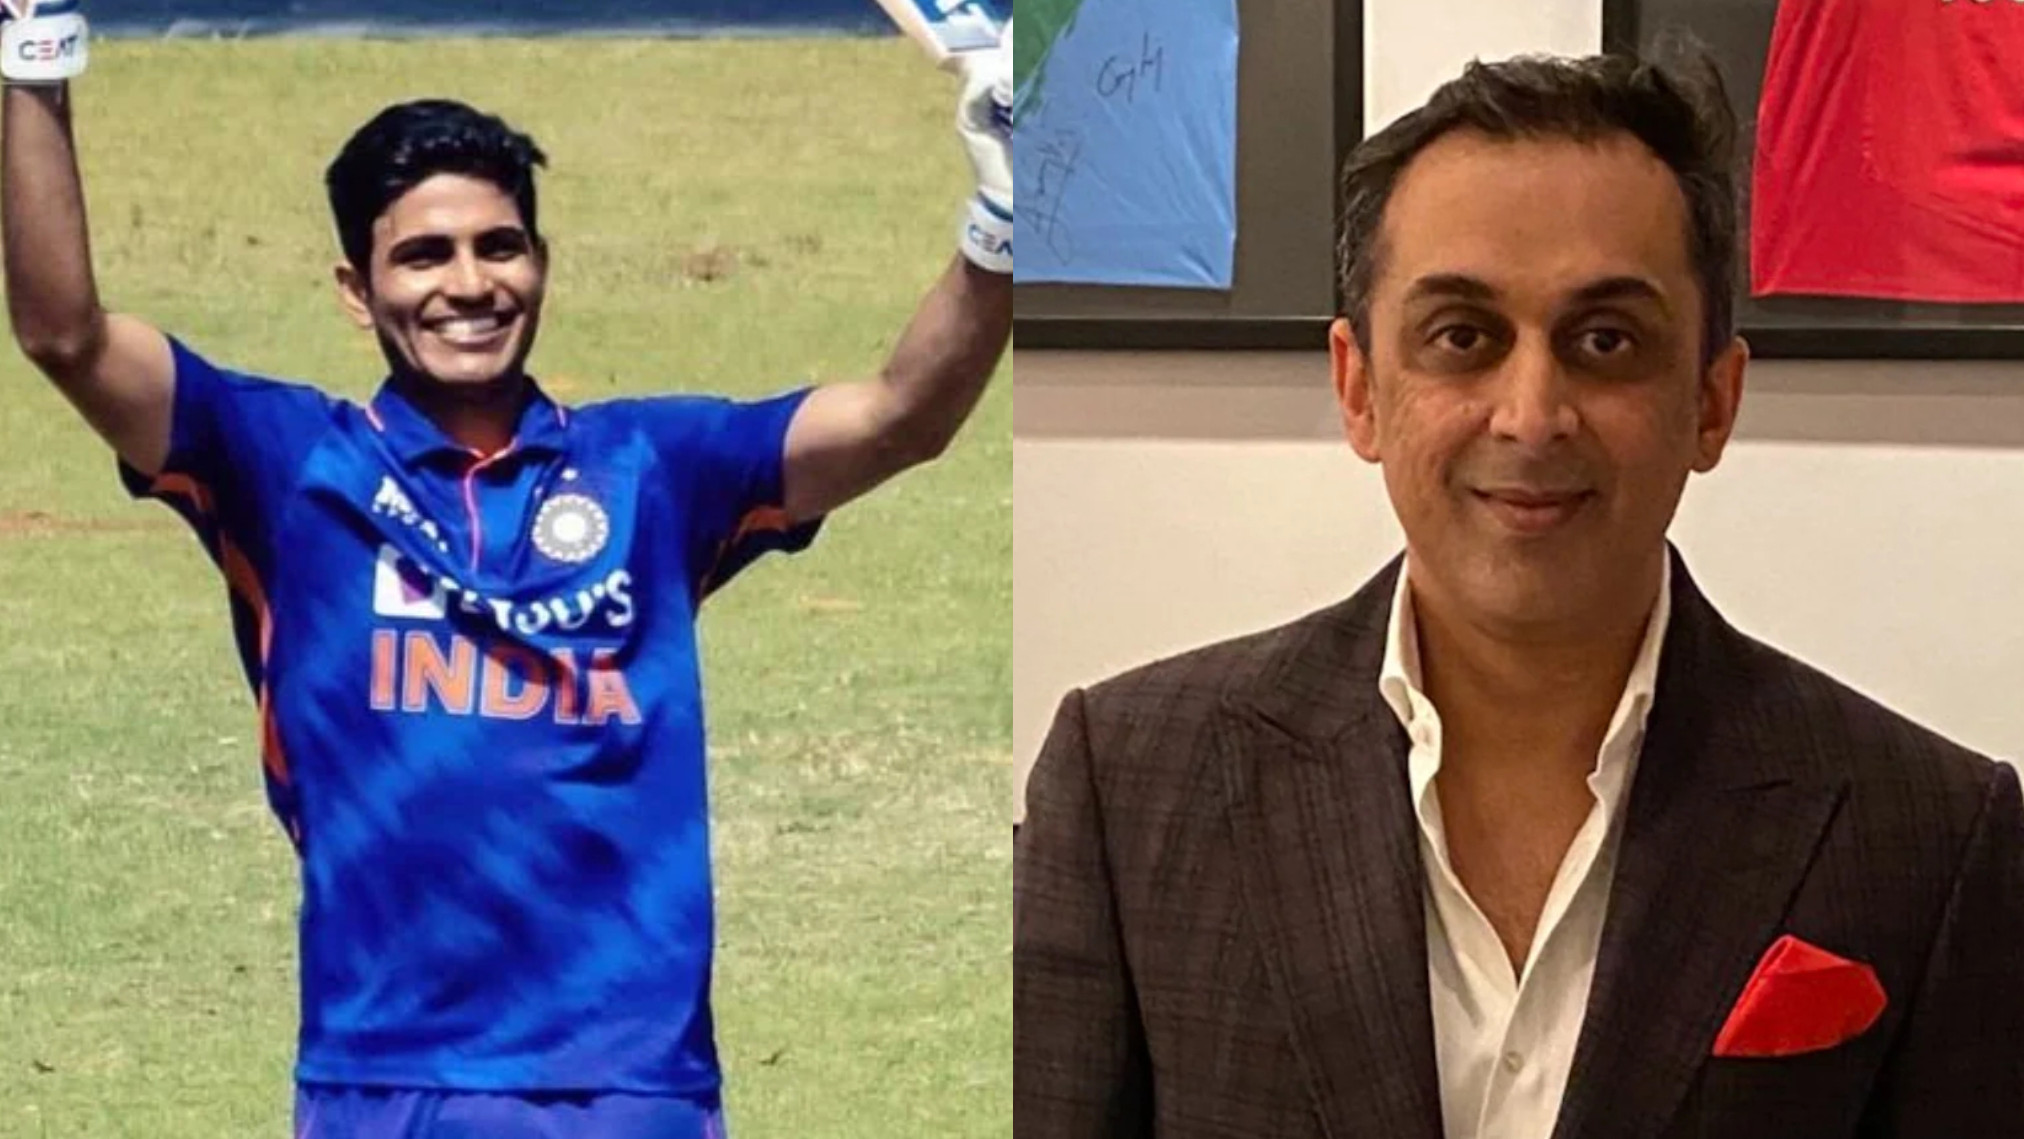 Shubman Gill will play for India in all three formats- Rohan Gavaskar heaps praise on young batter